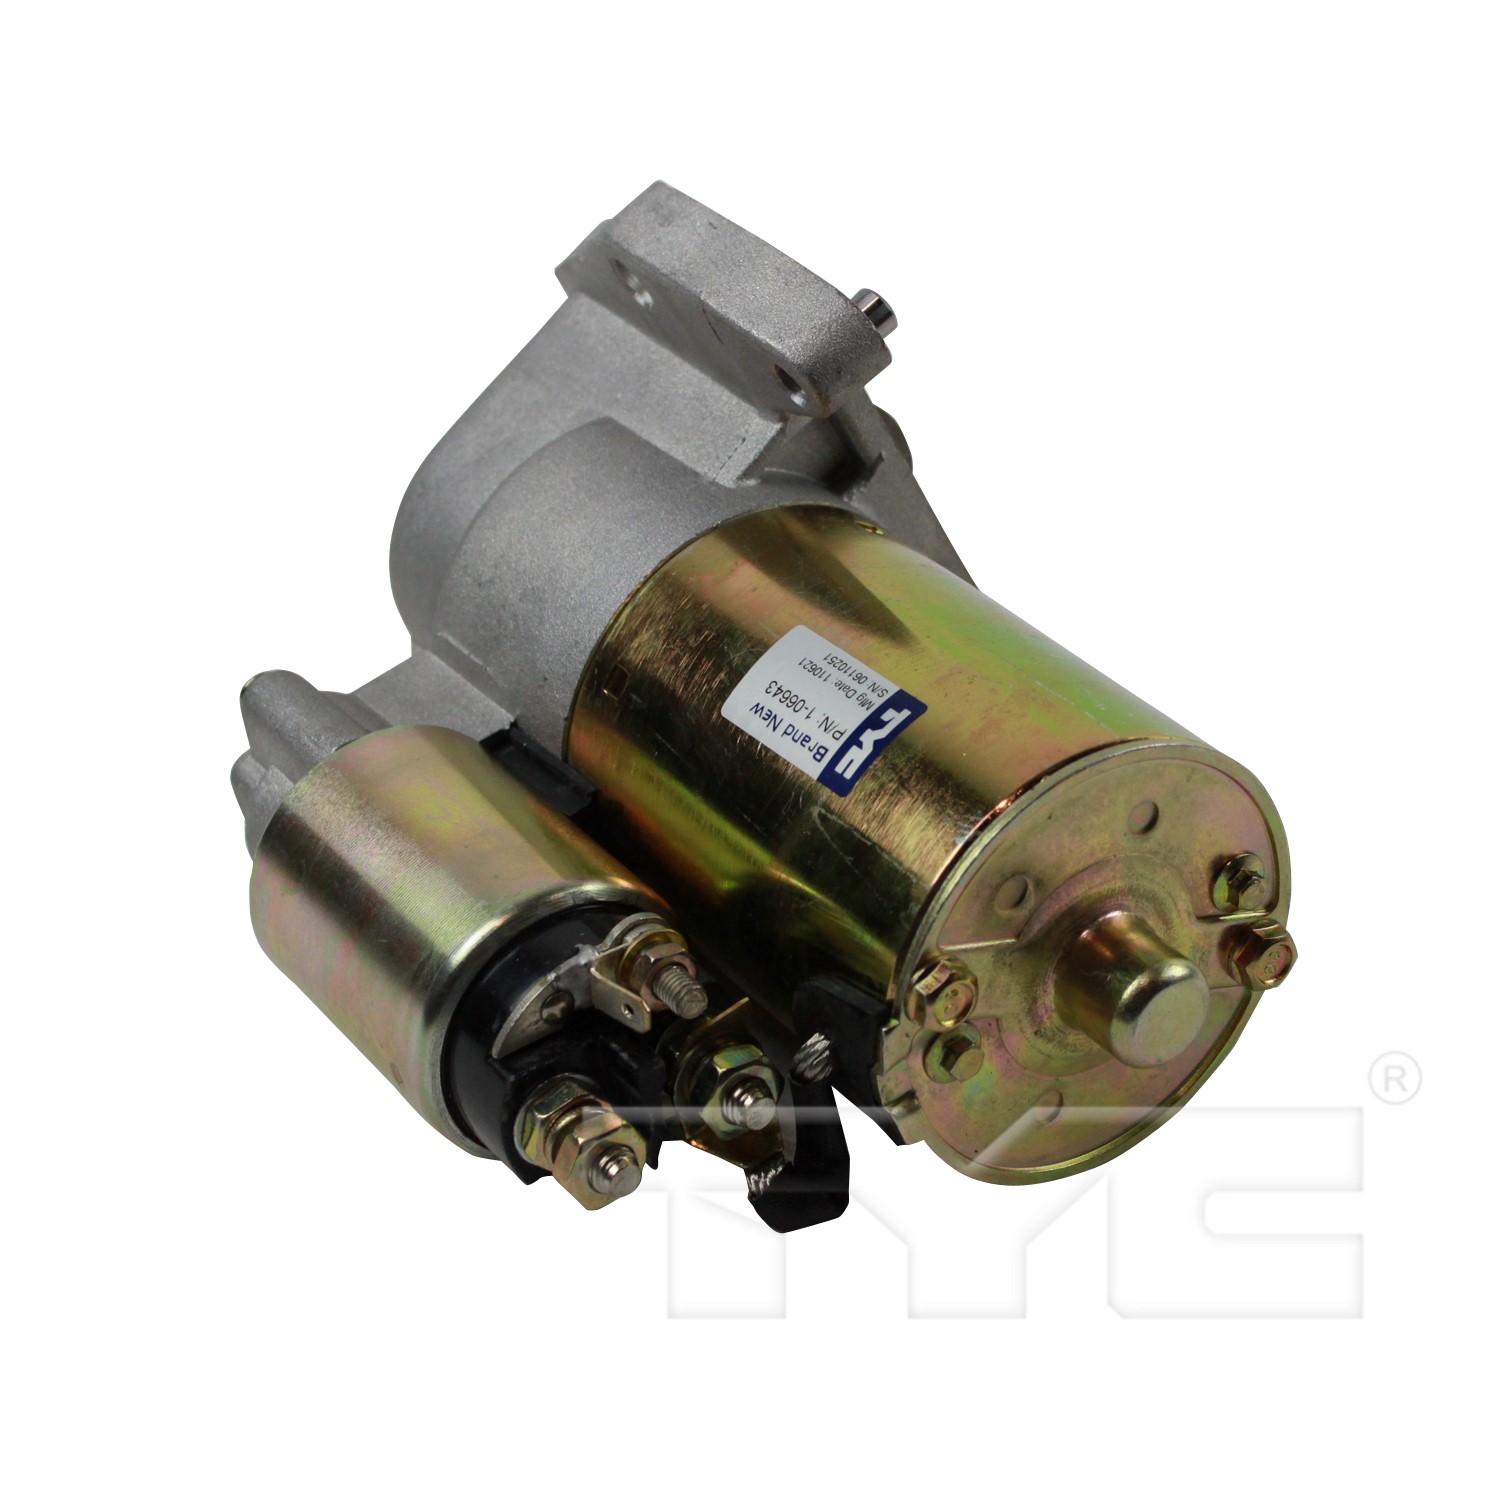 TYC-1-06643_NEW  TYC STARTER 12V 22T CCW PMGR FORD PMGR 1.5KW